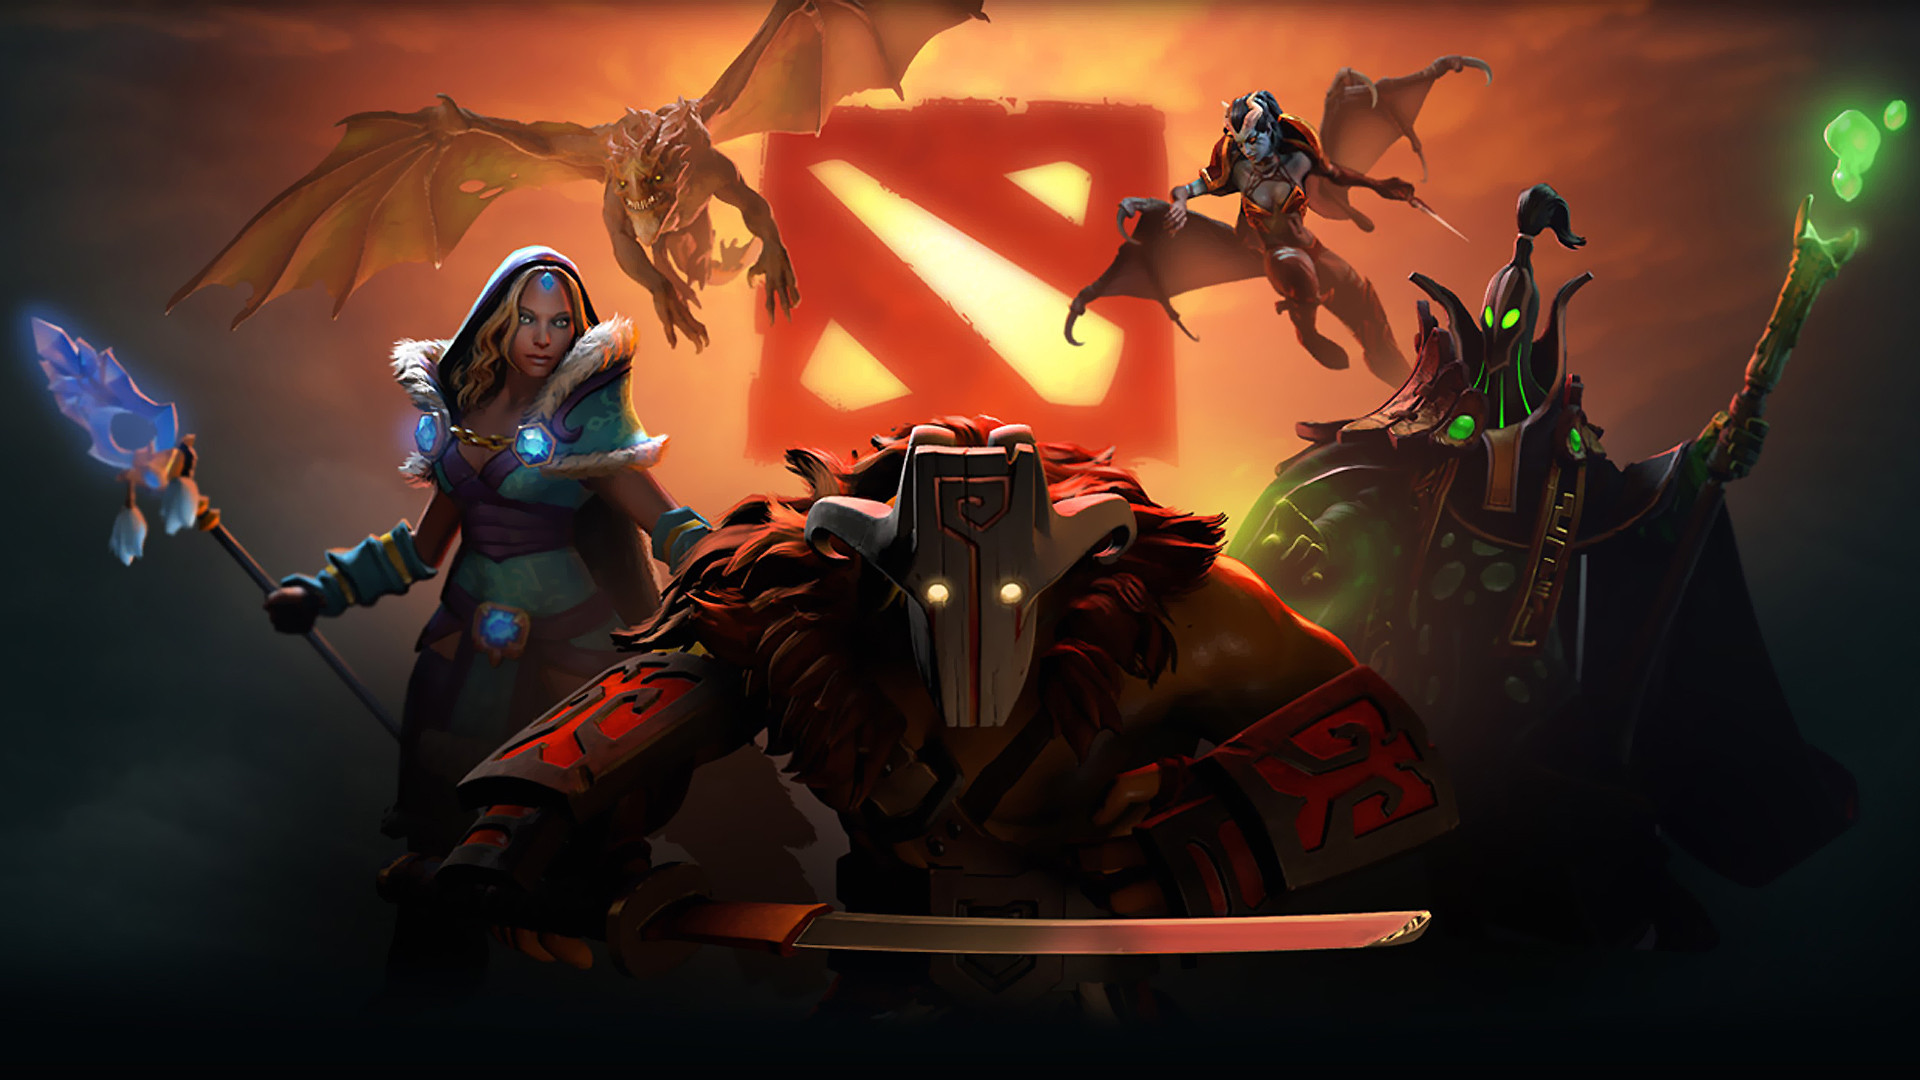 this dota 2 wallpaper is available in 24 sizes 1920x1080